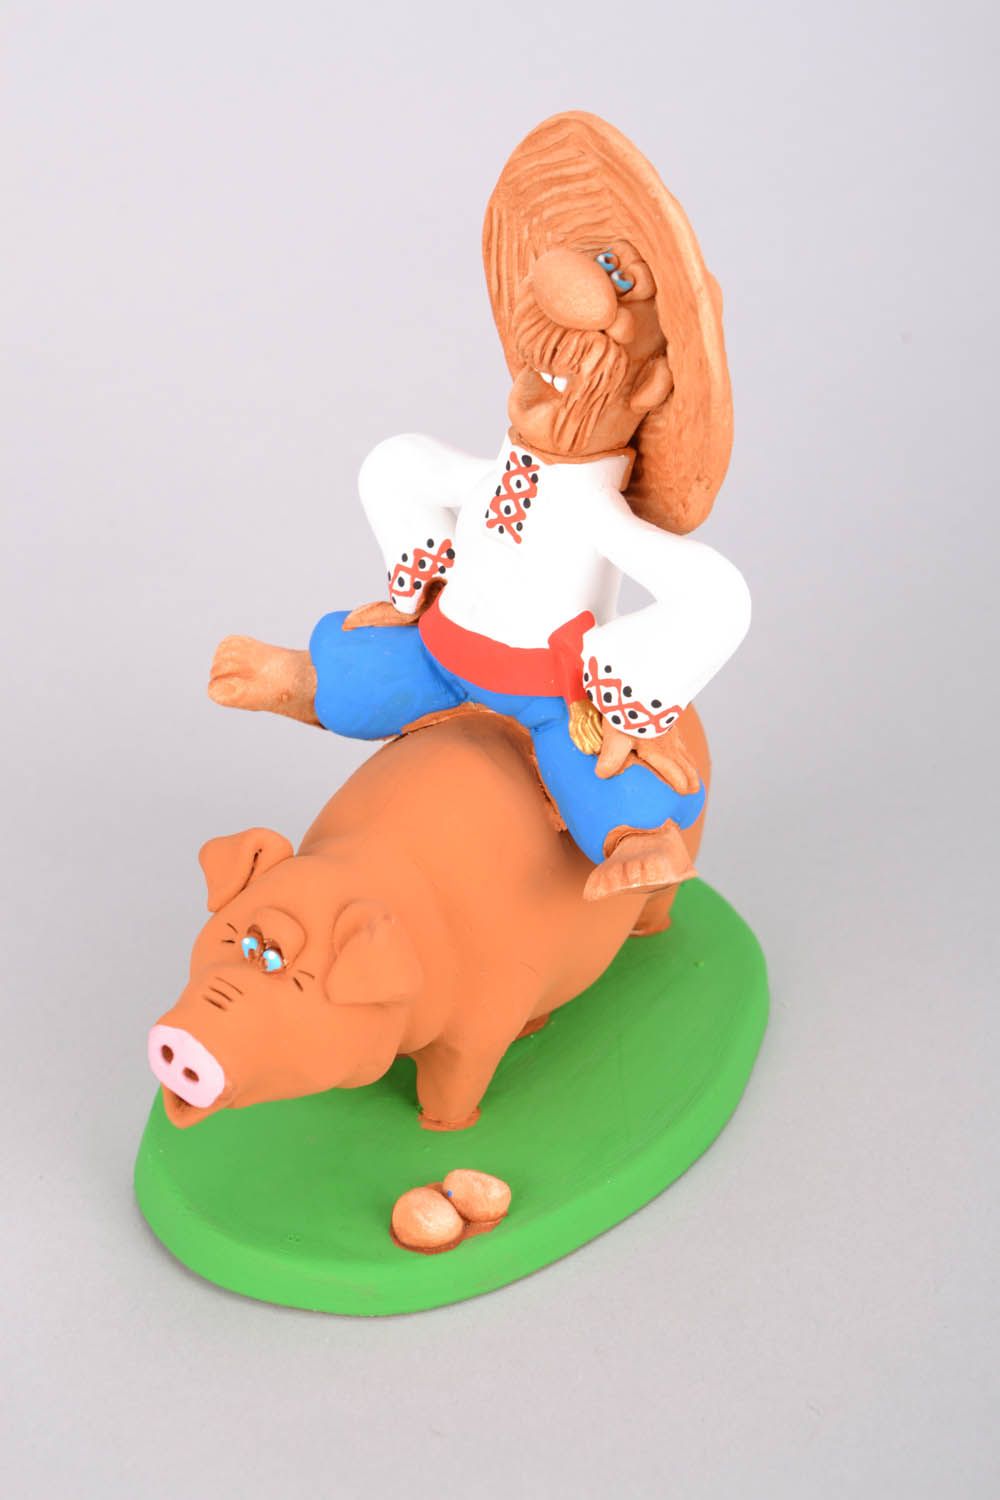 Homemade clay statuette Cossack Riding a Pig photo 3